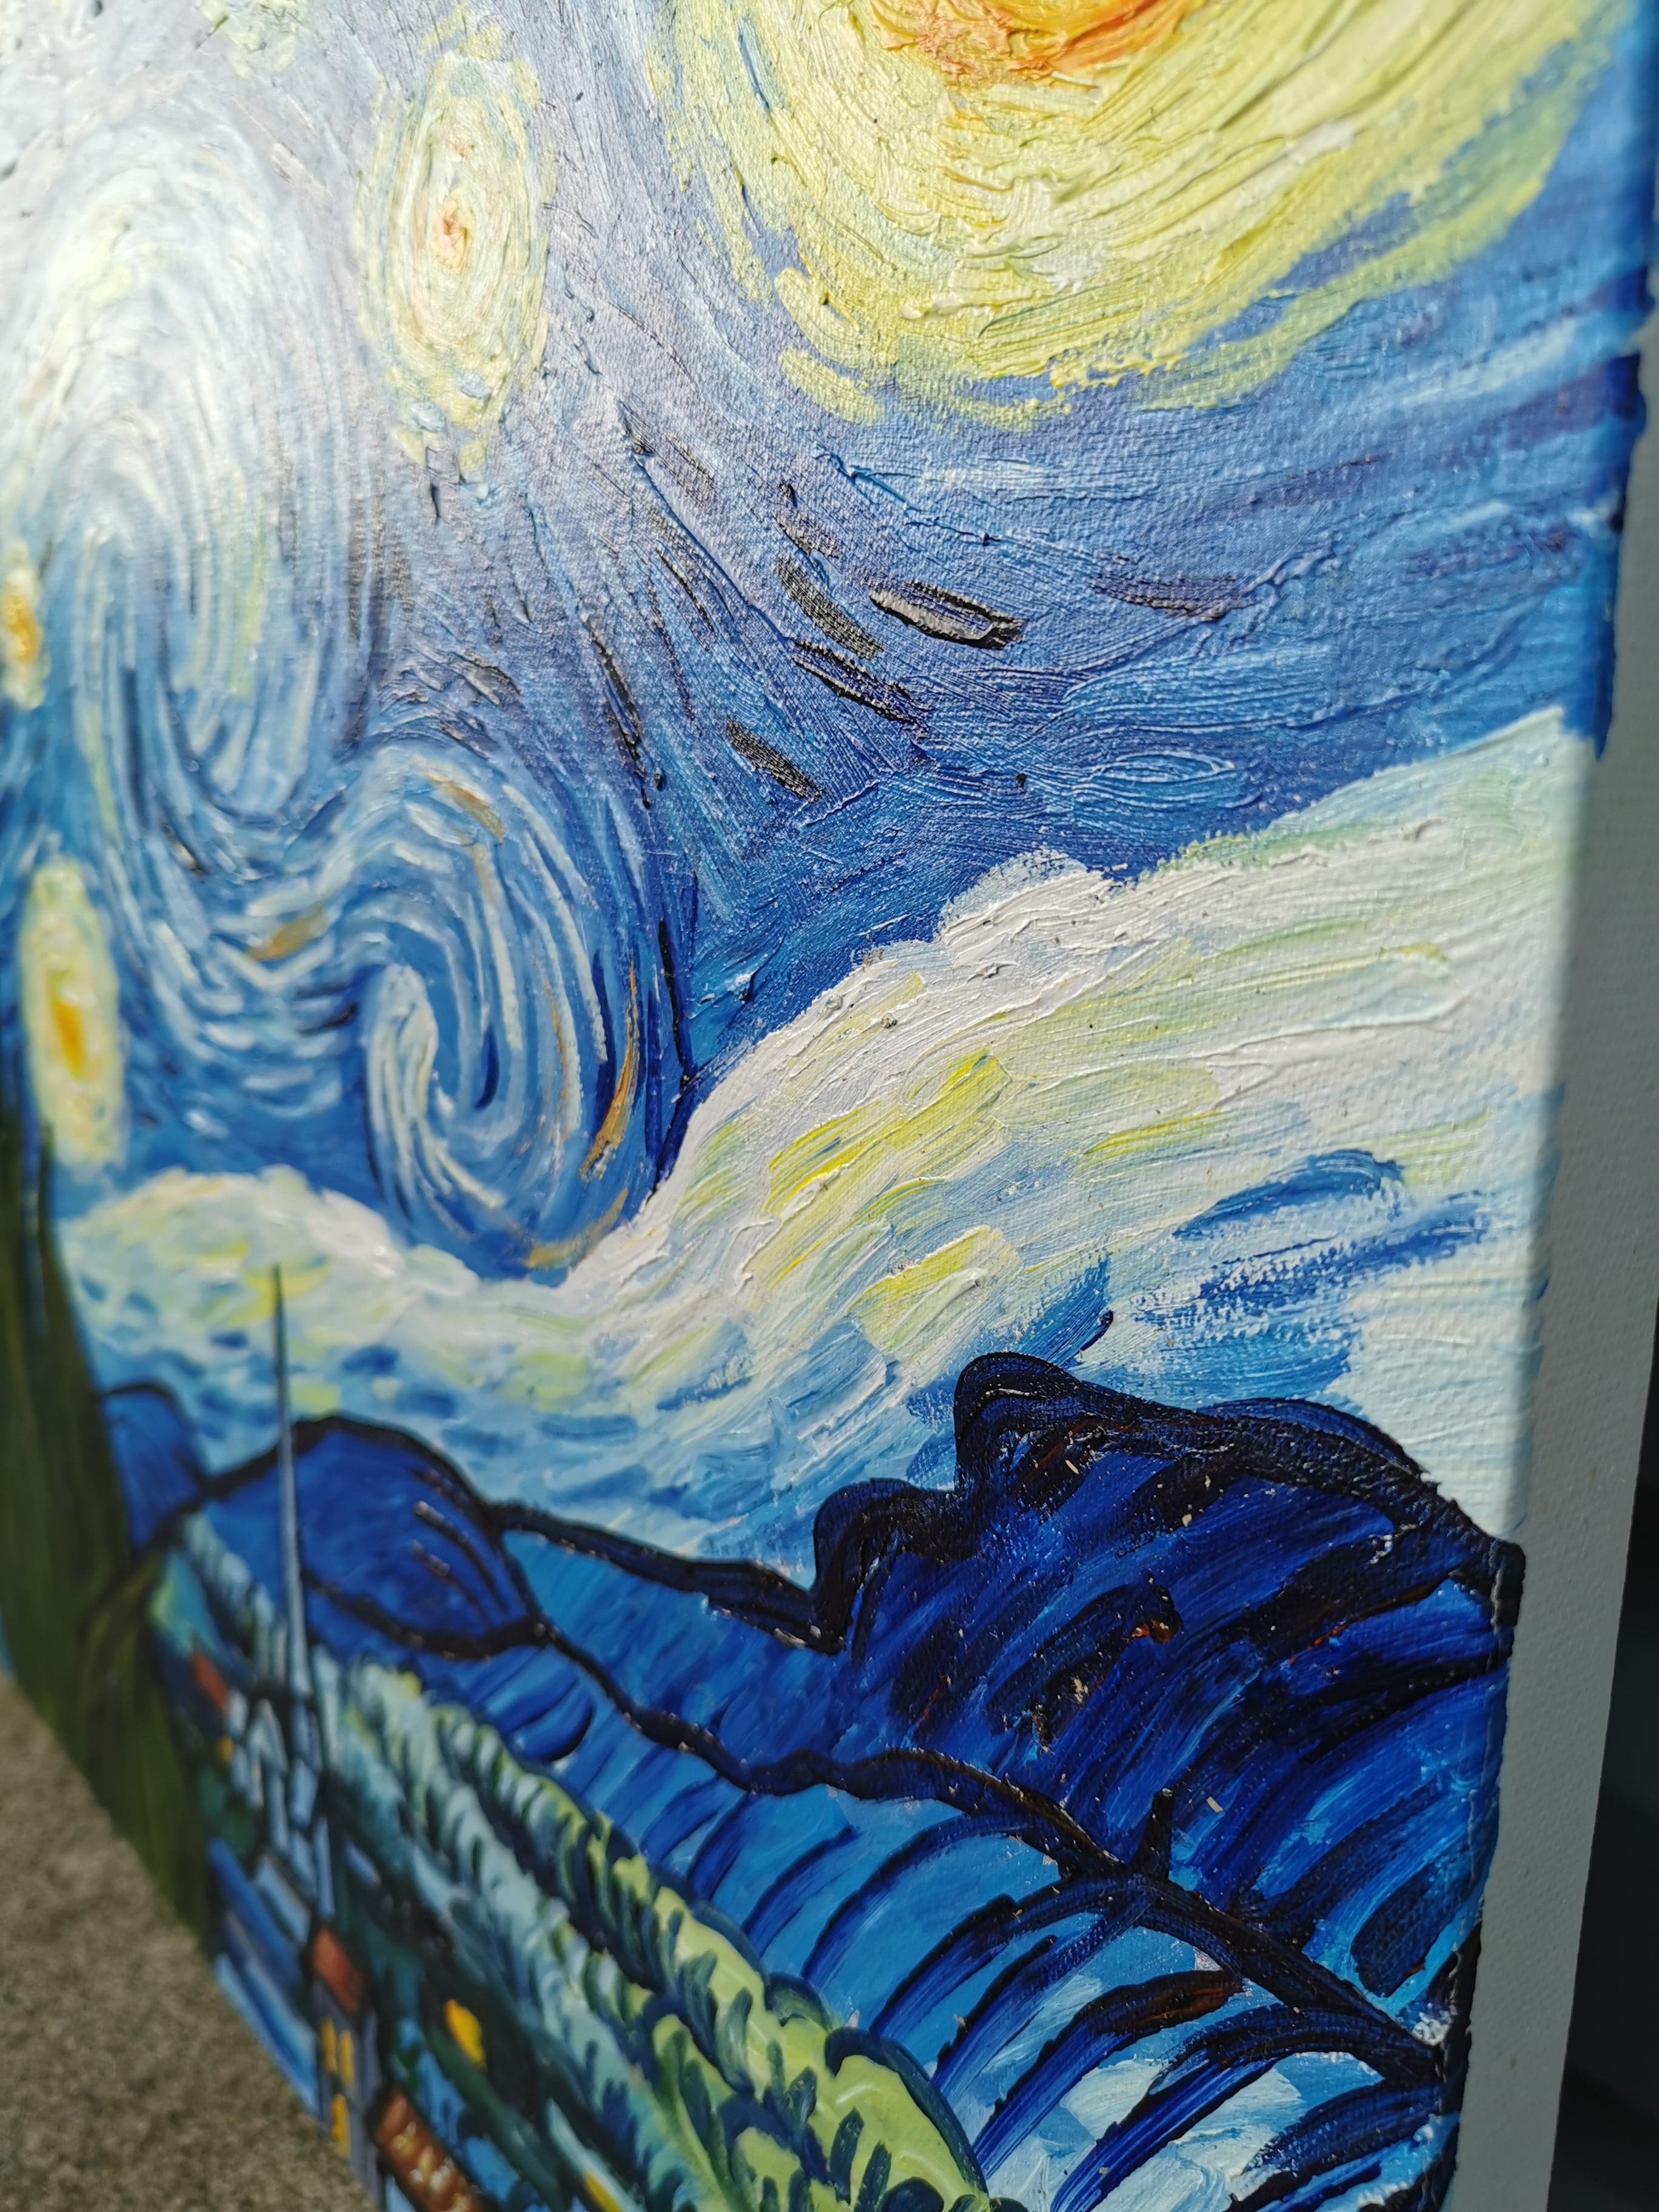 Framed 1 Panel - Oil Painting - The Starry Night (Van Gogh)